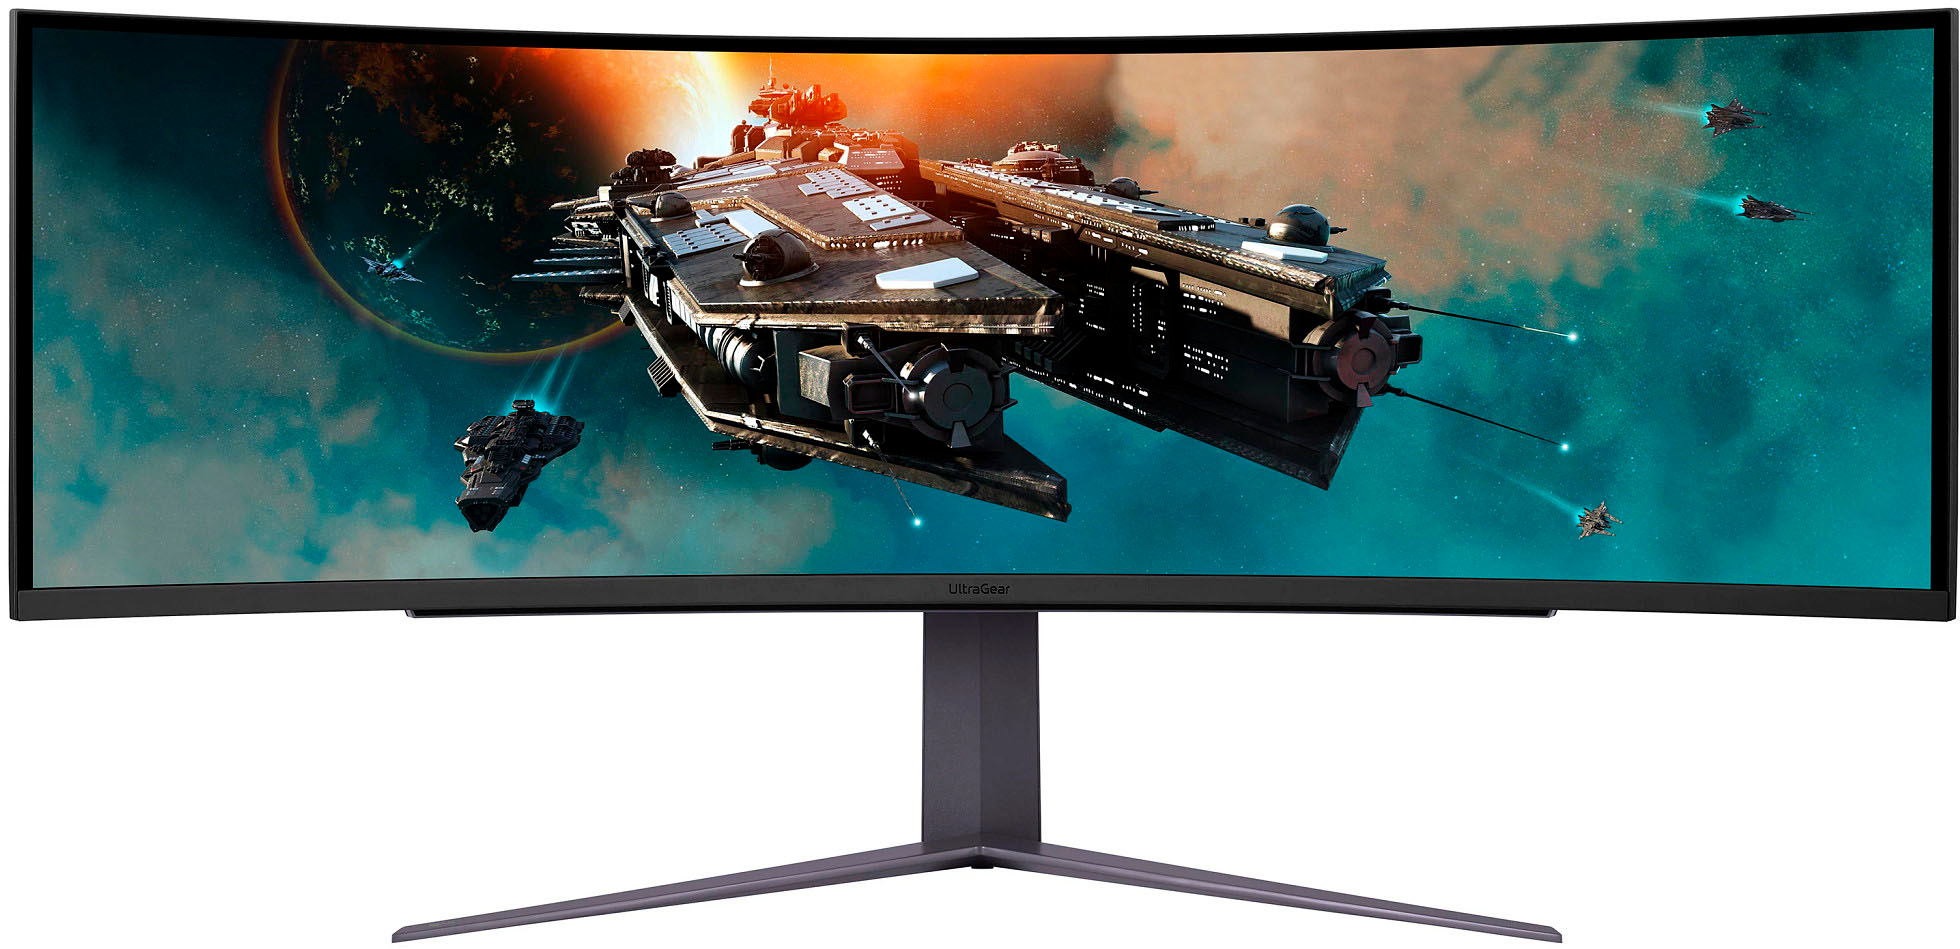 LG 49 IPS LED Curved UltraWide Dual QHD 144Hz FreeSync and G-SYNC  Compatible Monitor with HDR (HDMI, DisplayPort, USB) Black 49WQ95C-W.AUS -  Best Buy